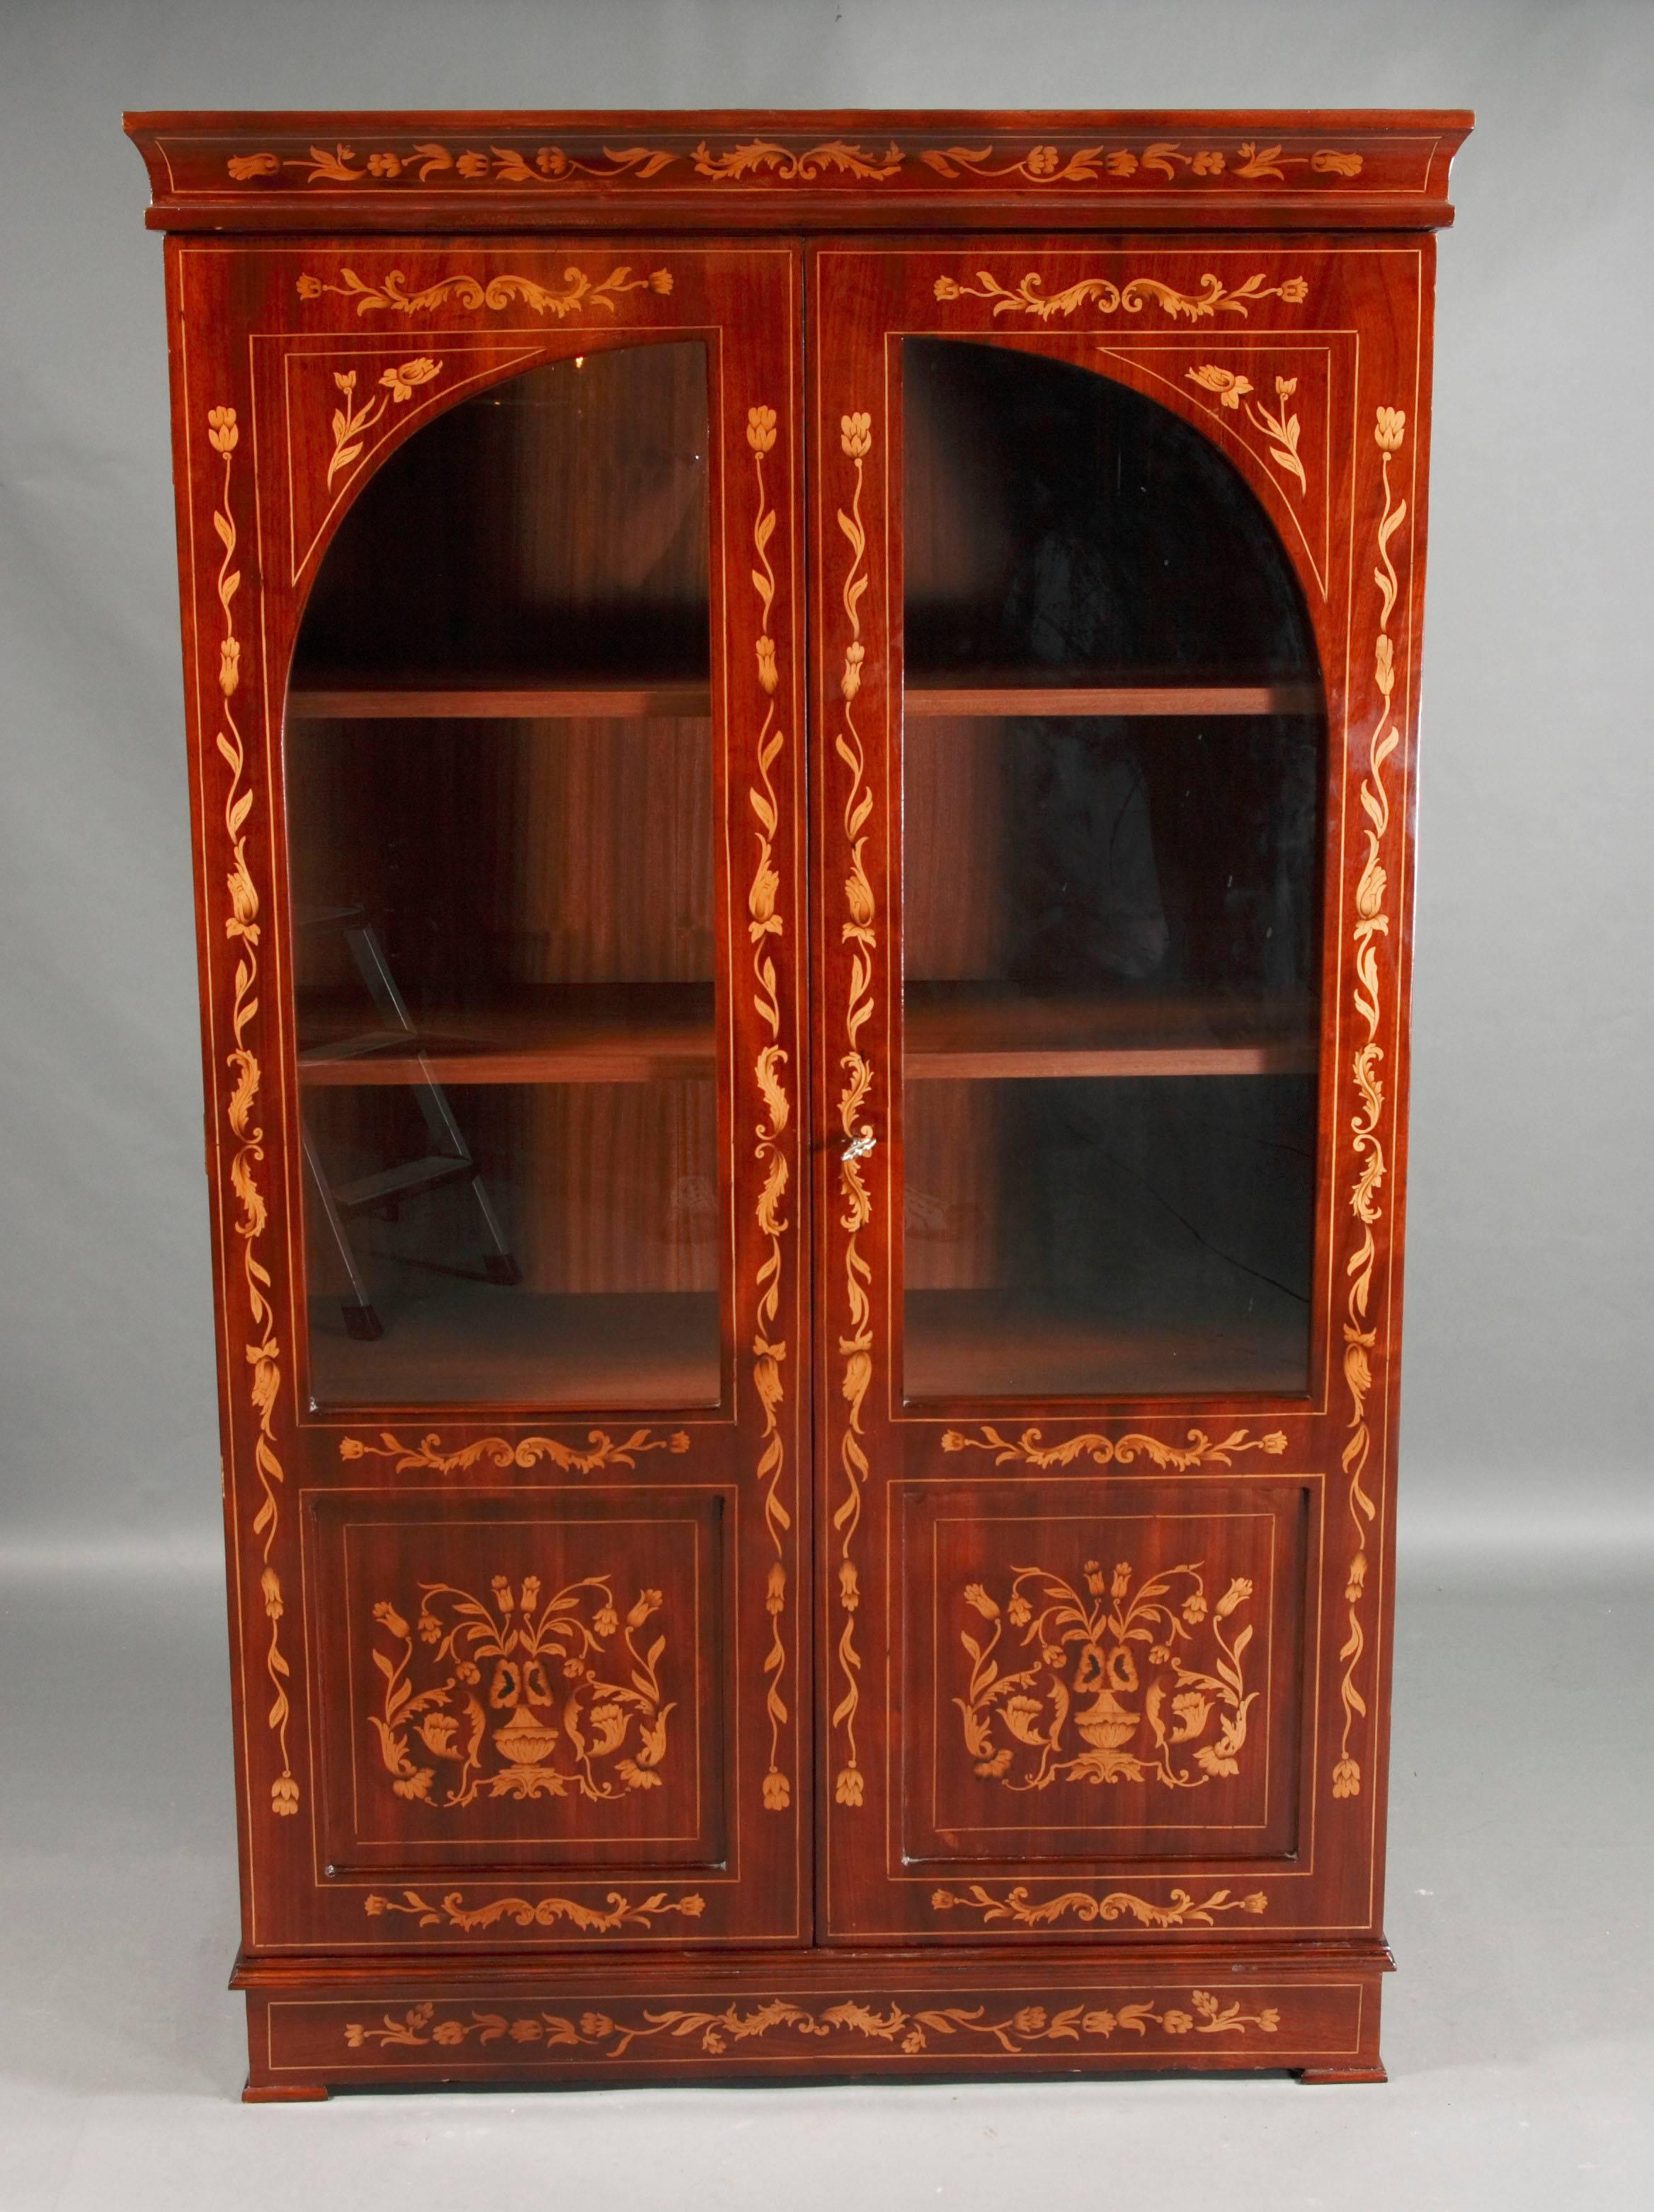 Light mahogany on solid wood.
Exceptionally rich intarsia work.
 2 doors with glass.